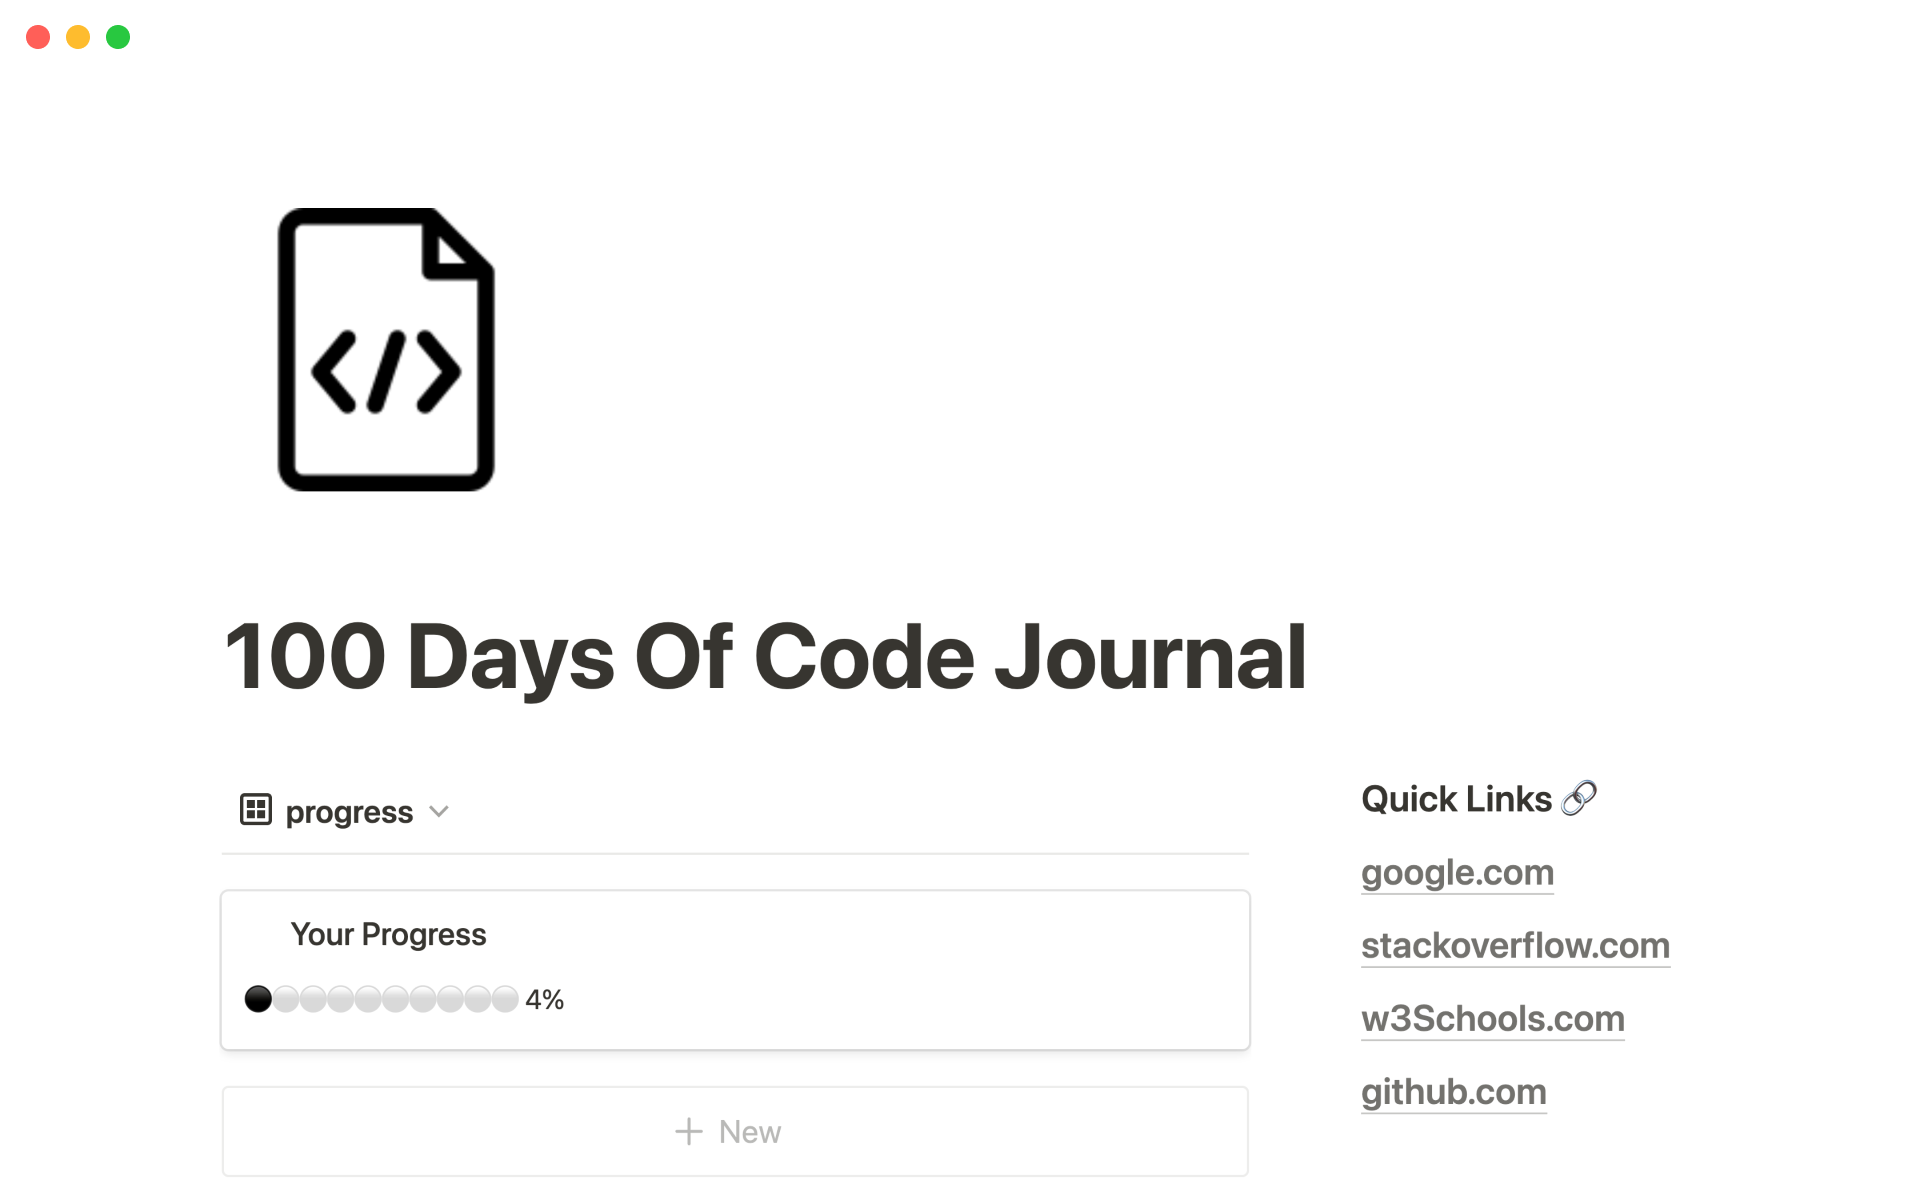 Record and track your 100 days of code challenge progress.